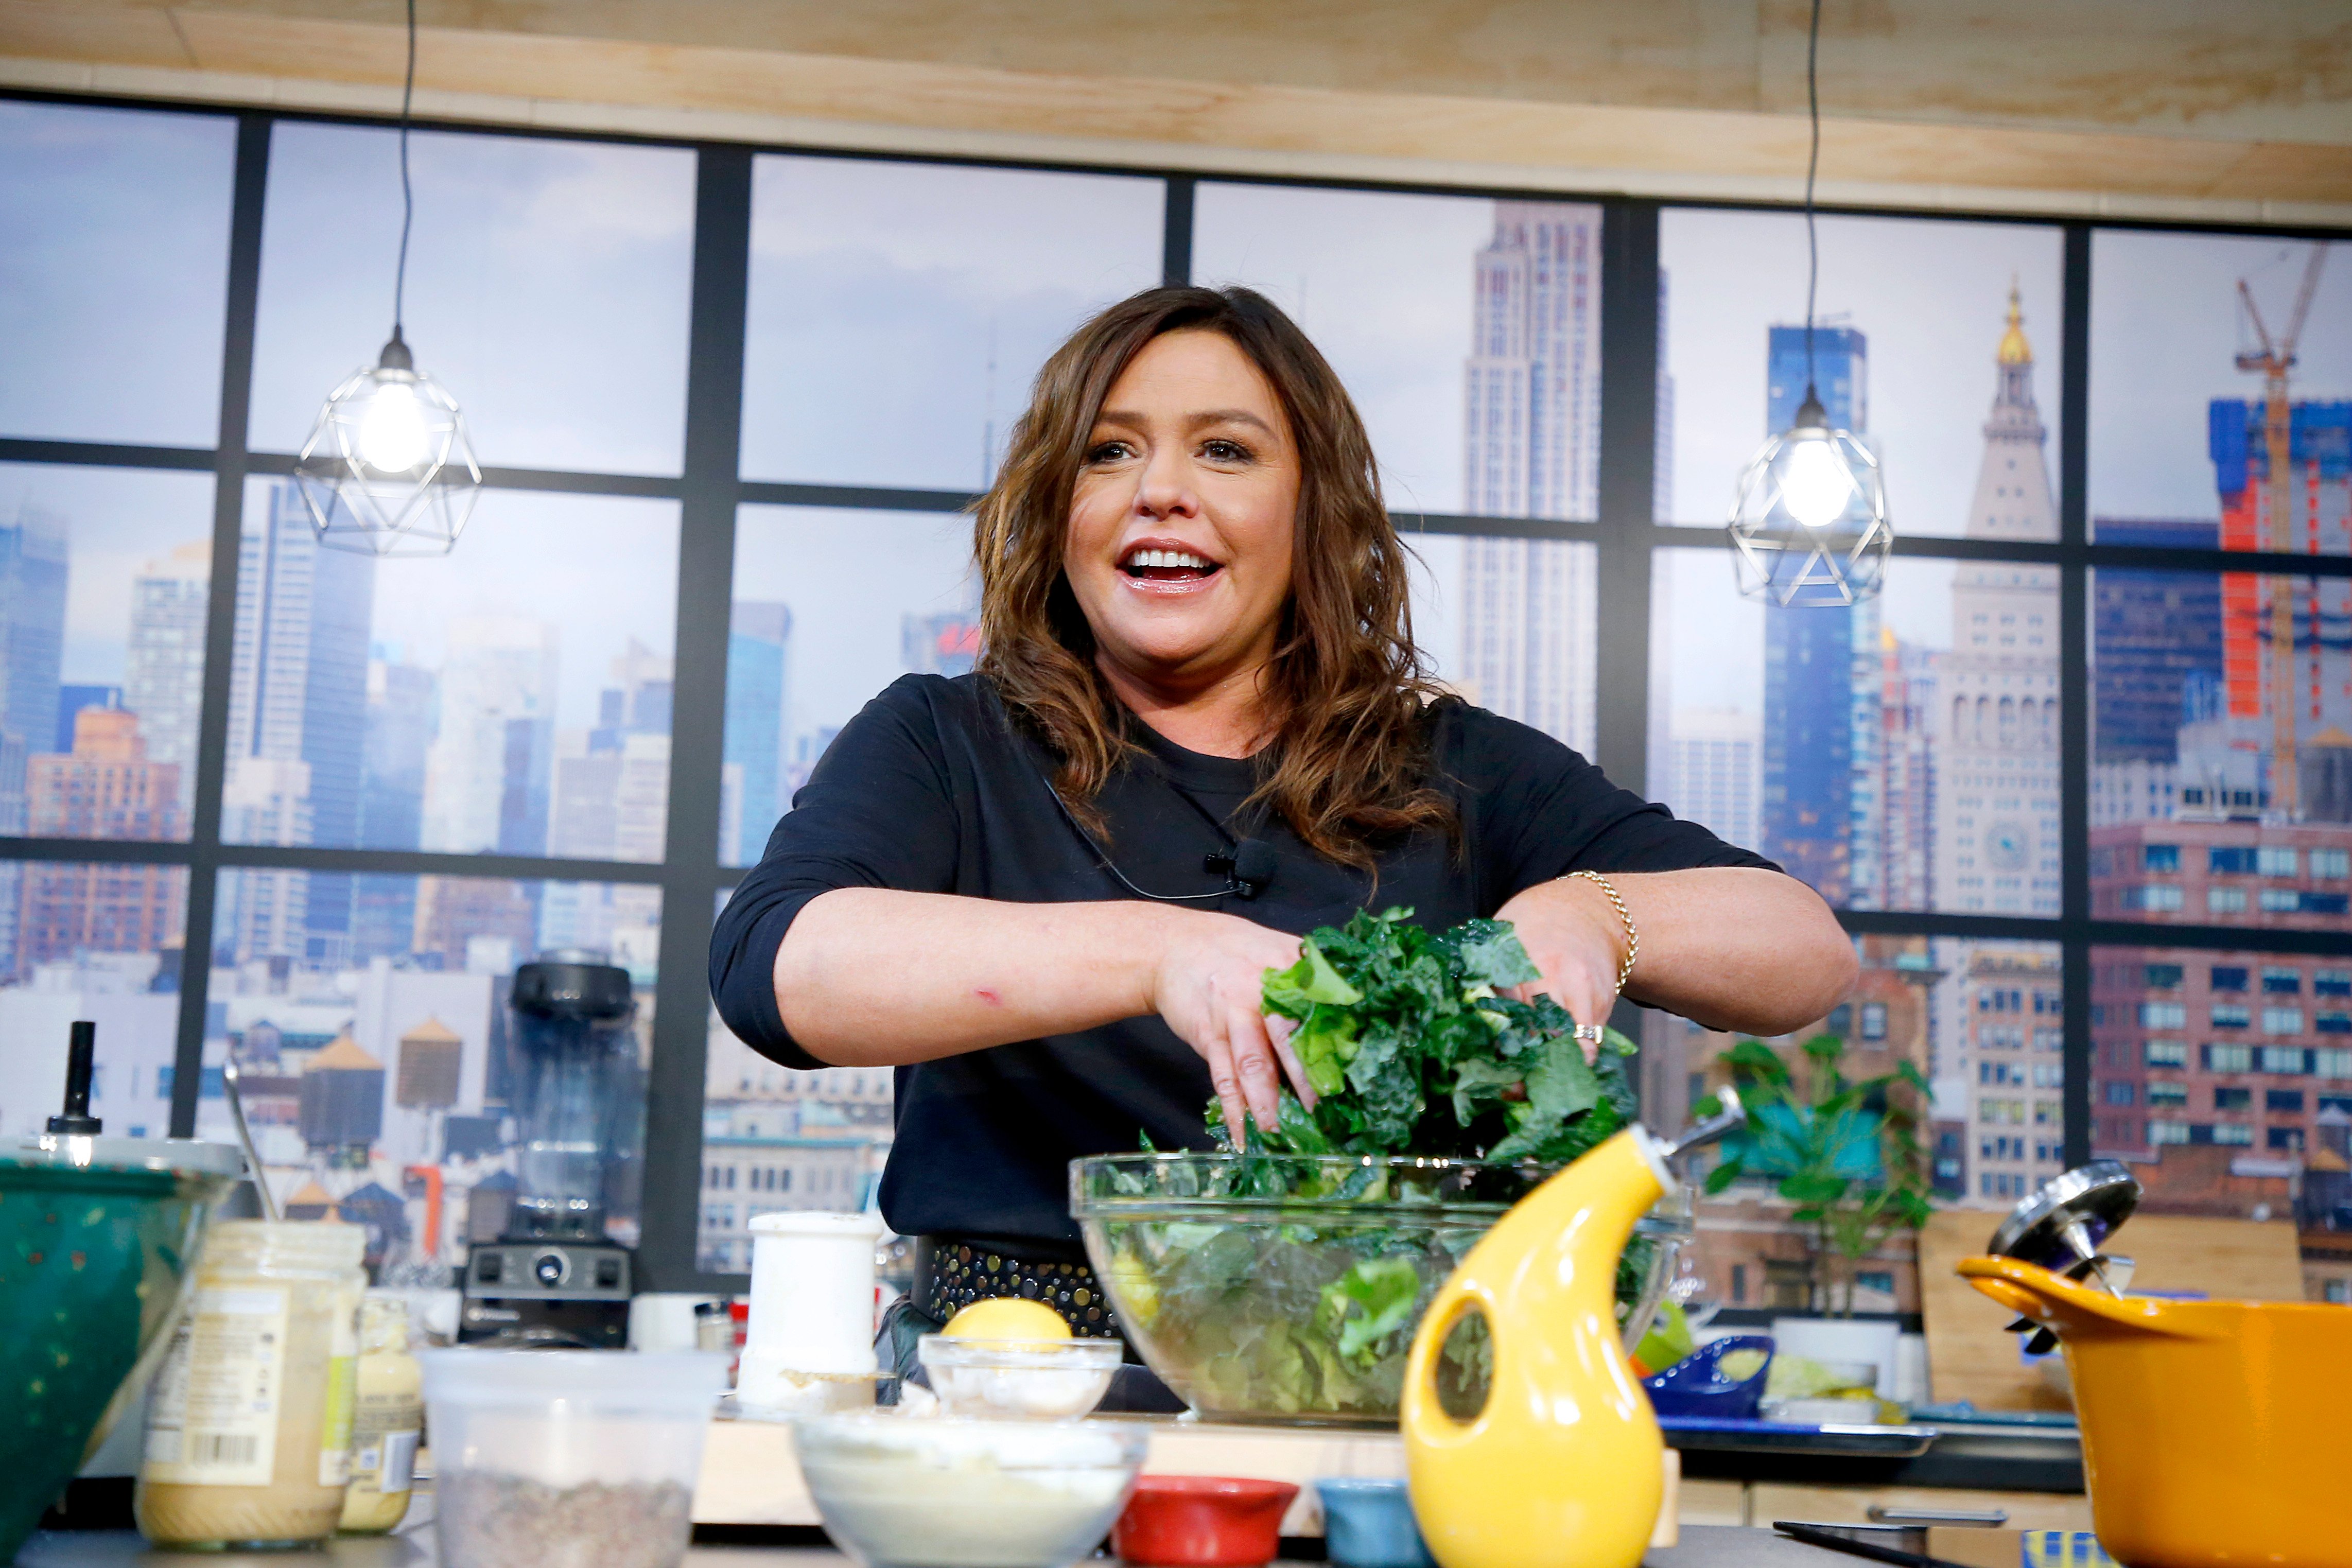 Rachael Ray onstage during a culinary demonstration at the Grand Tasting presented by ShopRite featuring Culinary Demonstrations at The IKEA Kitchen presented by Capital One at Pier 94